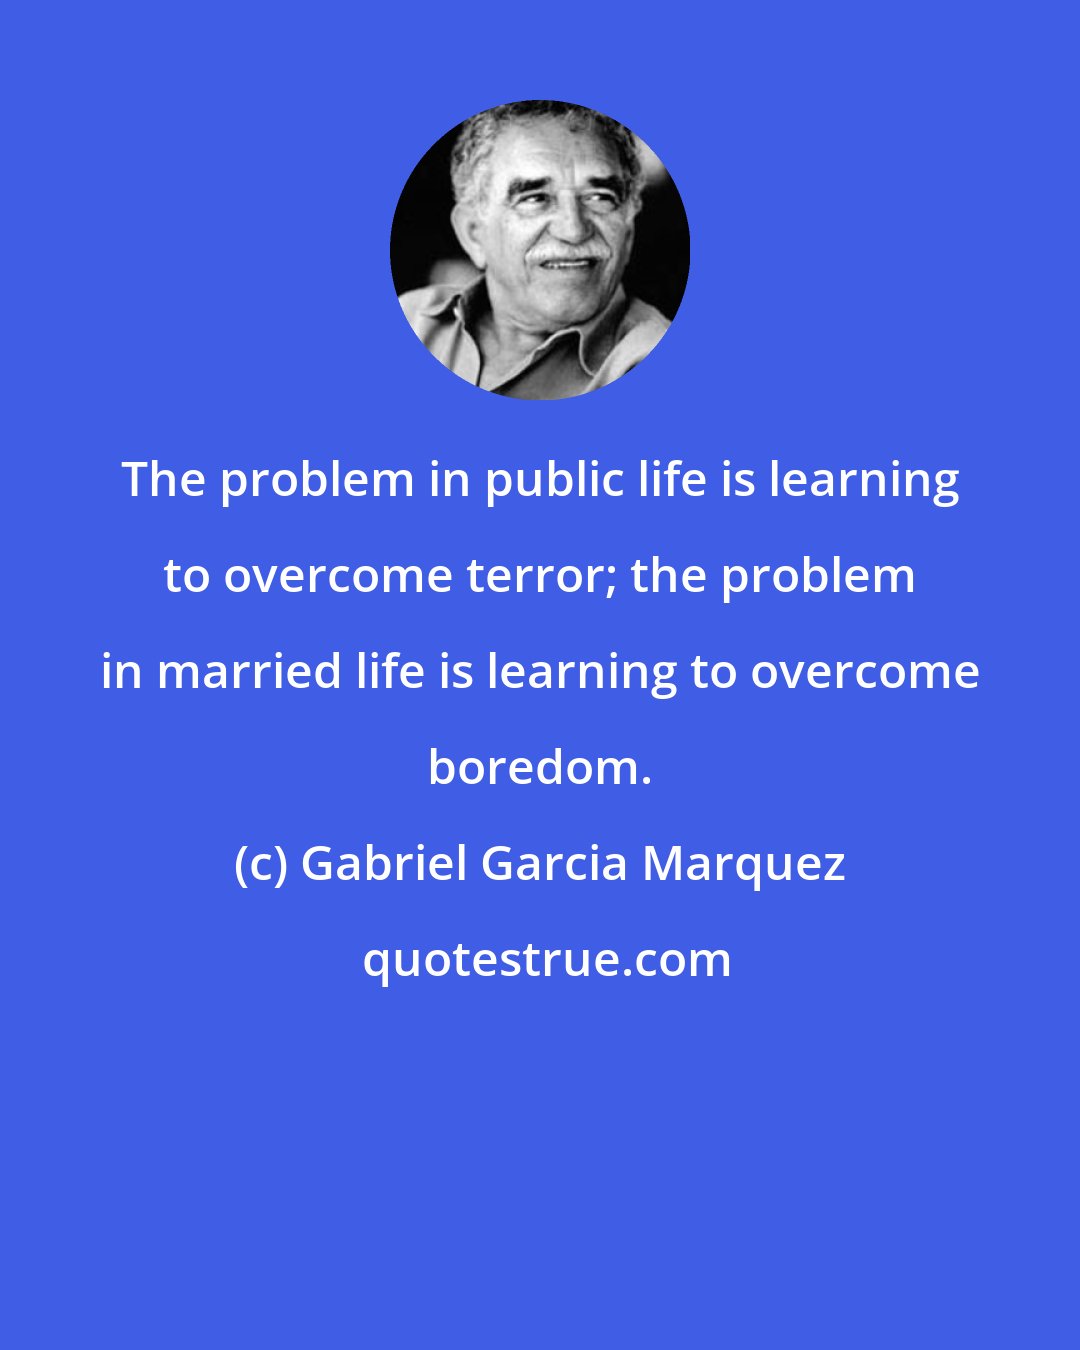 Gabriel Garcia Marquez: The problem in public life is learning to overcome terror; the problem in married life is learning to overcome boredom.